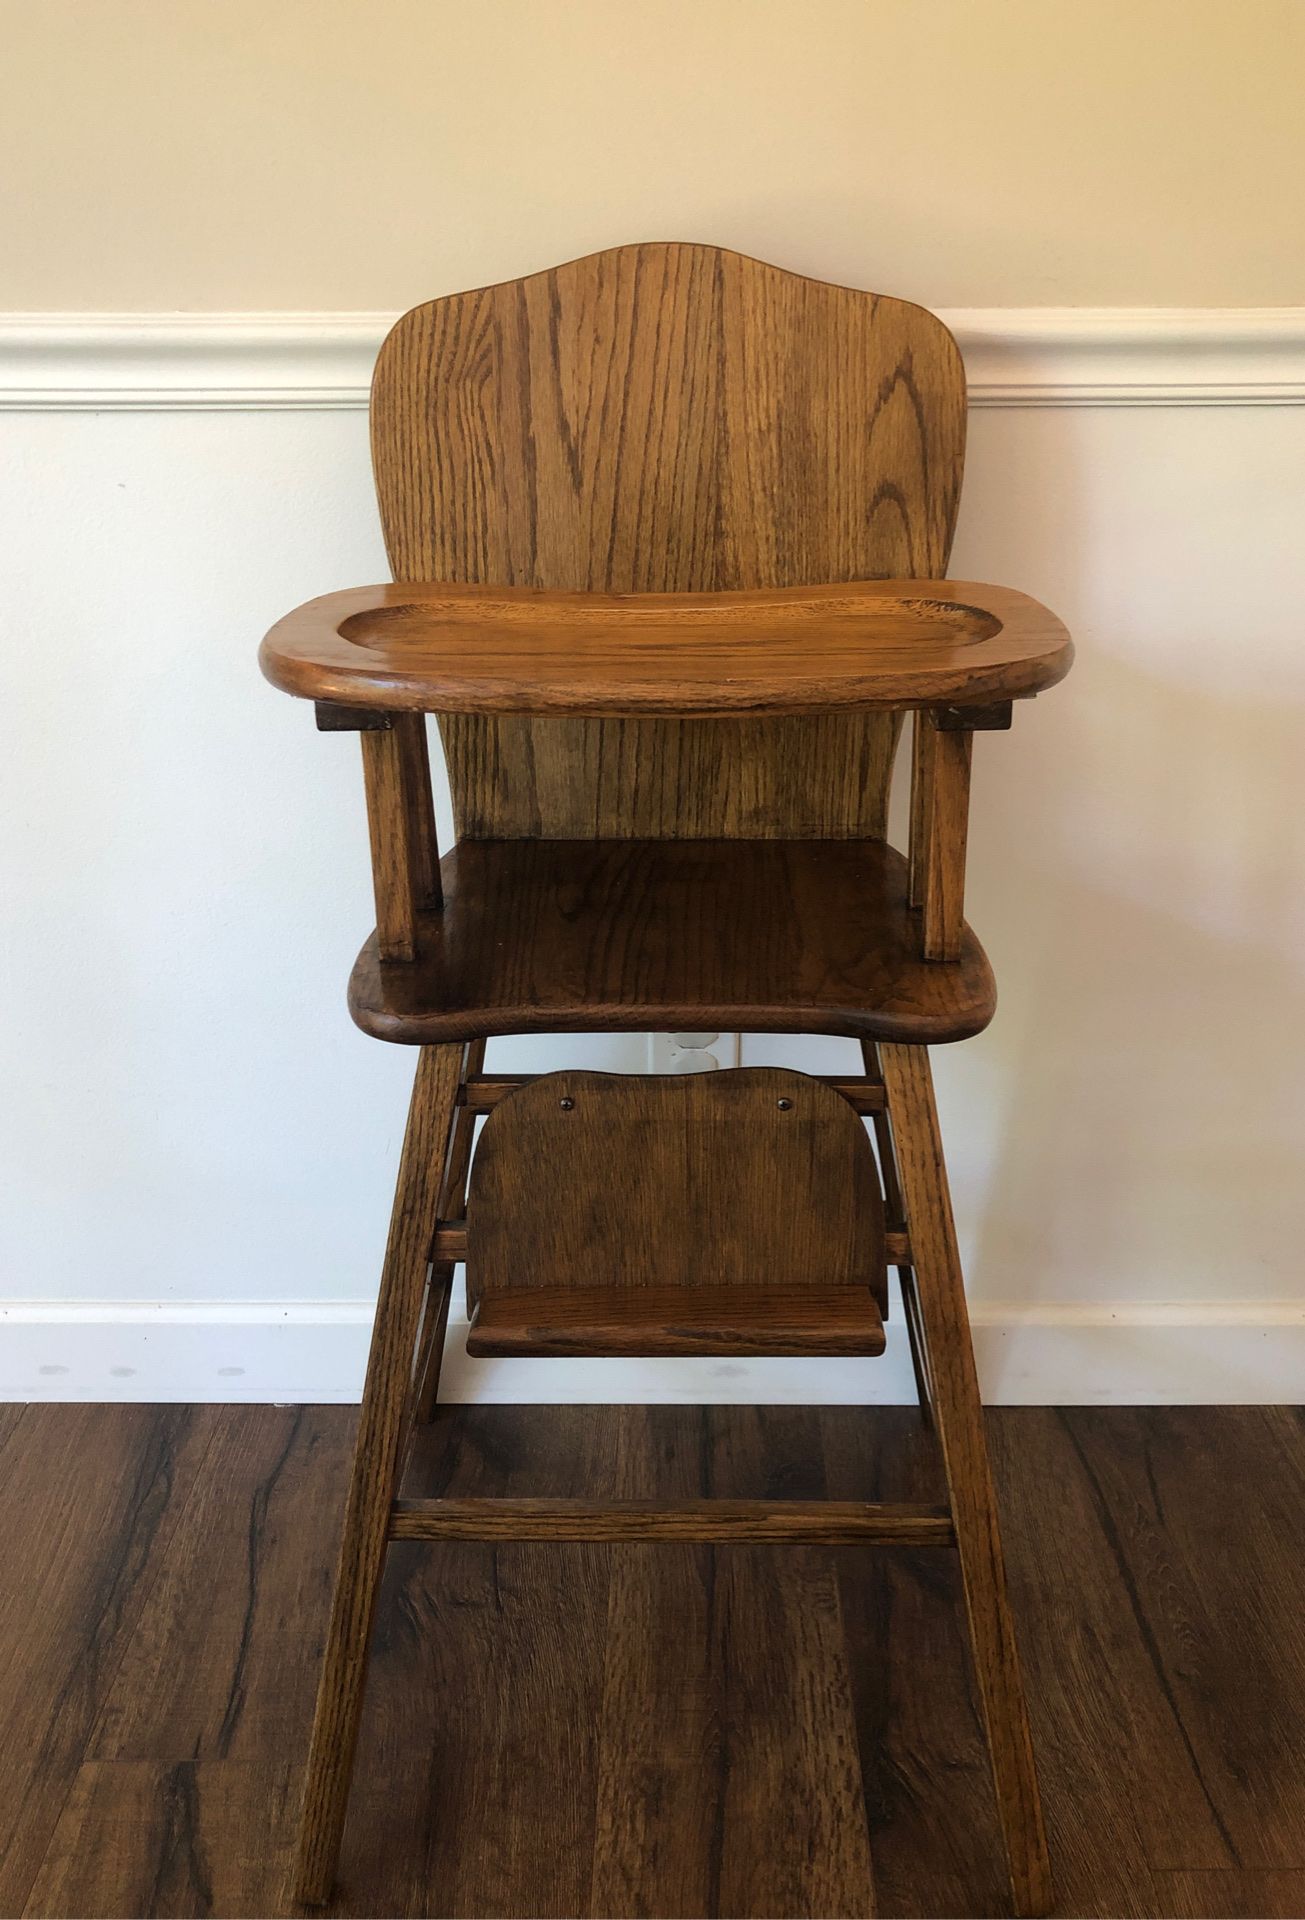 Functional antique vintage wooden high chair